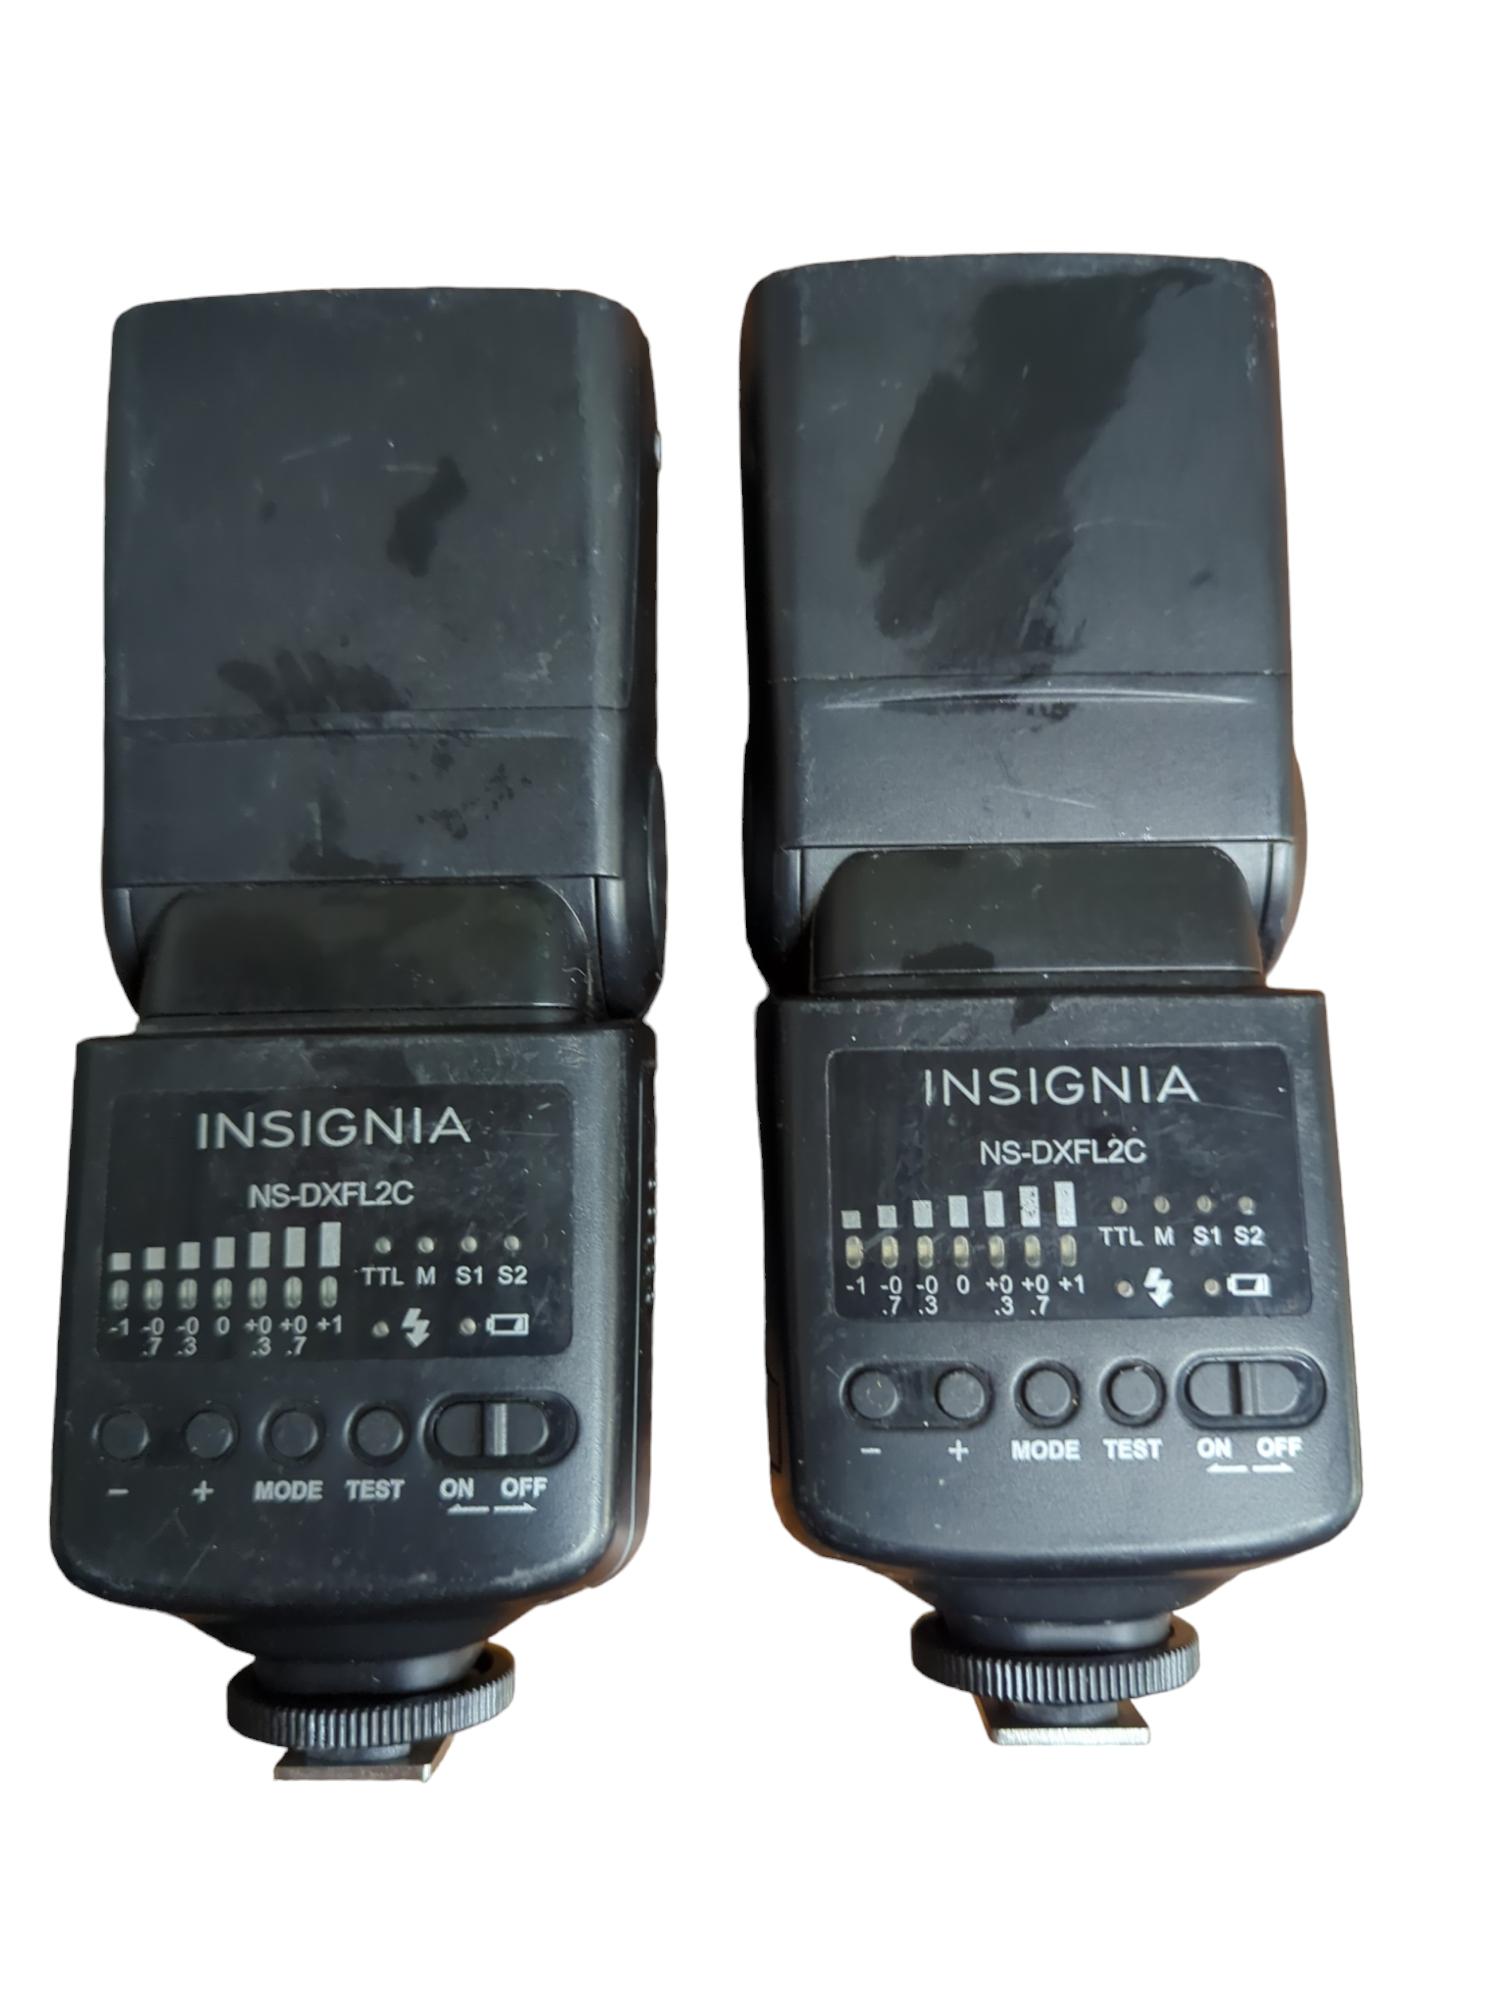 Pair of Insignia NS-DXFL2C Black Portable Hot Shoe Mount TTL External Flashes